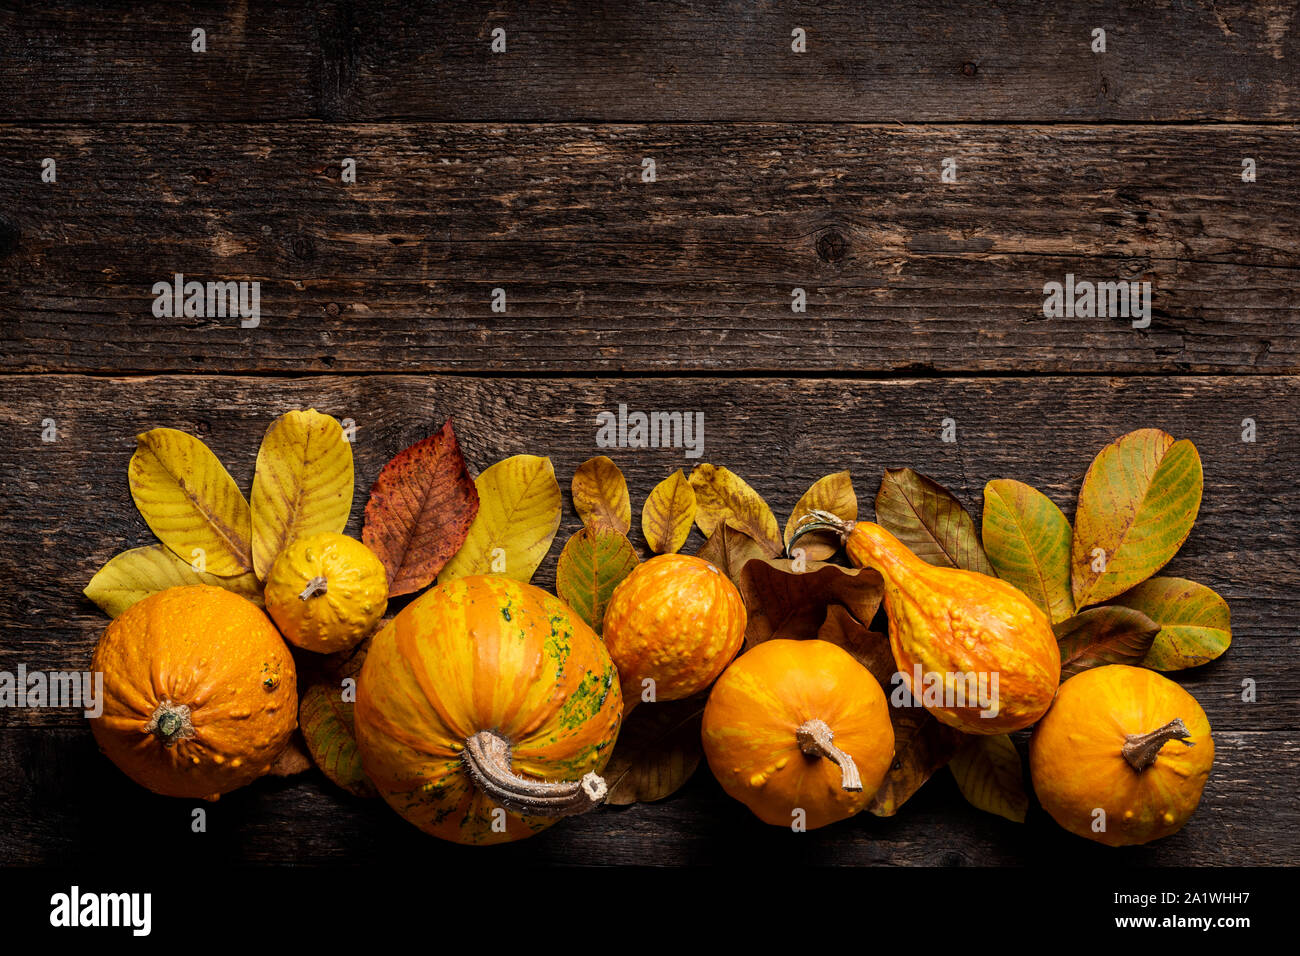 Happy Thanksgiving. Pumpkin and fallen leaves on dark wooden background. Autumn vegetables and seasonal decorations. Autumn Harvest and Holiday still Stock Photo